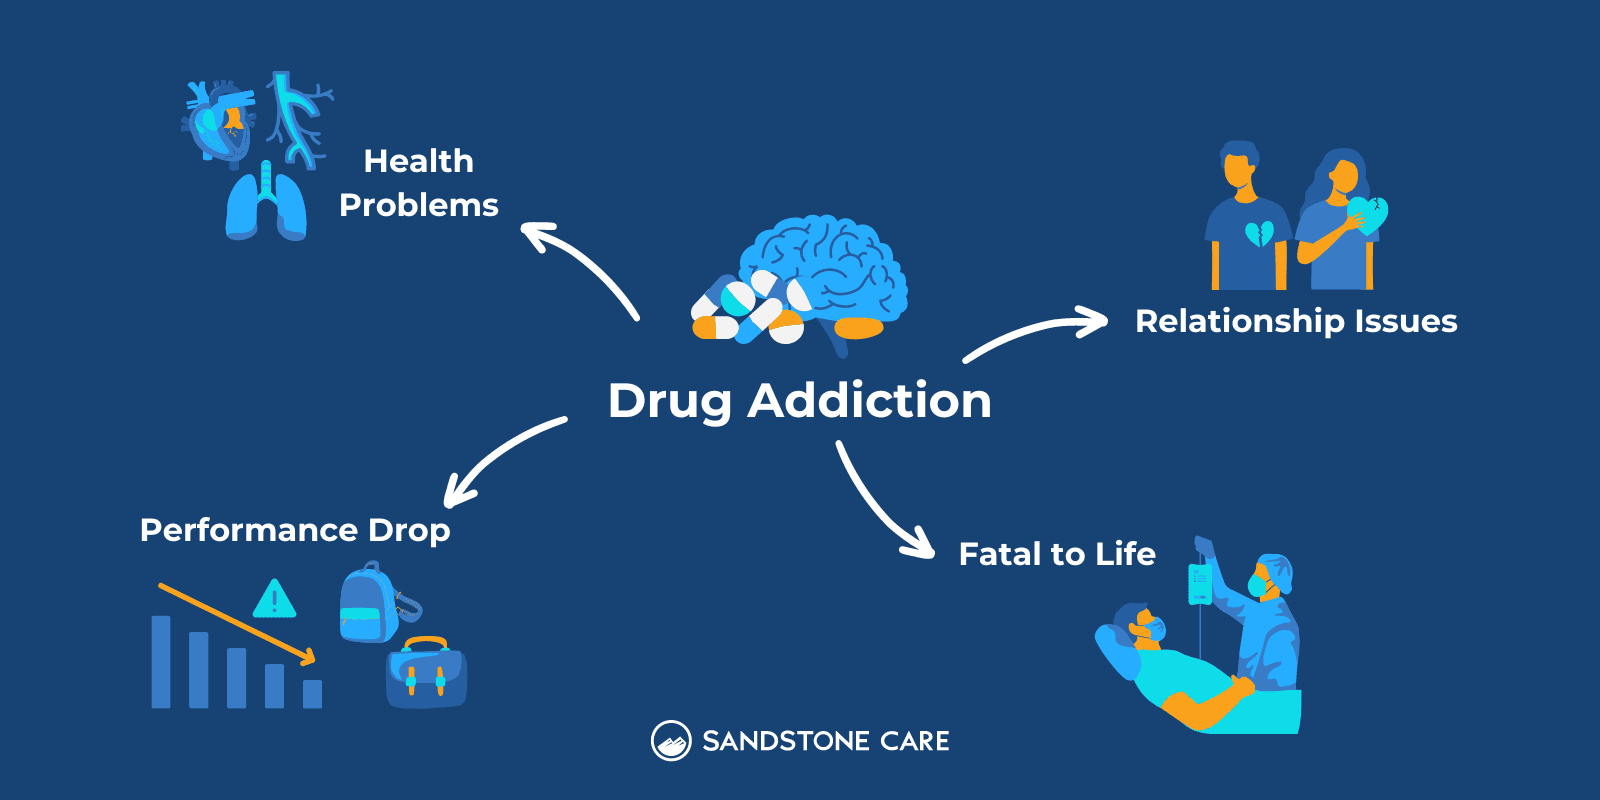 Addiction impacting health, relationships, and performance represented with relevant icons